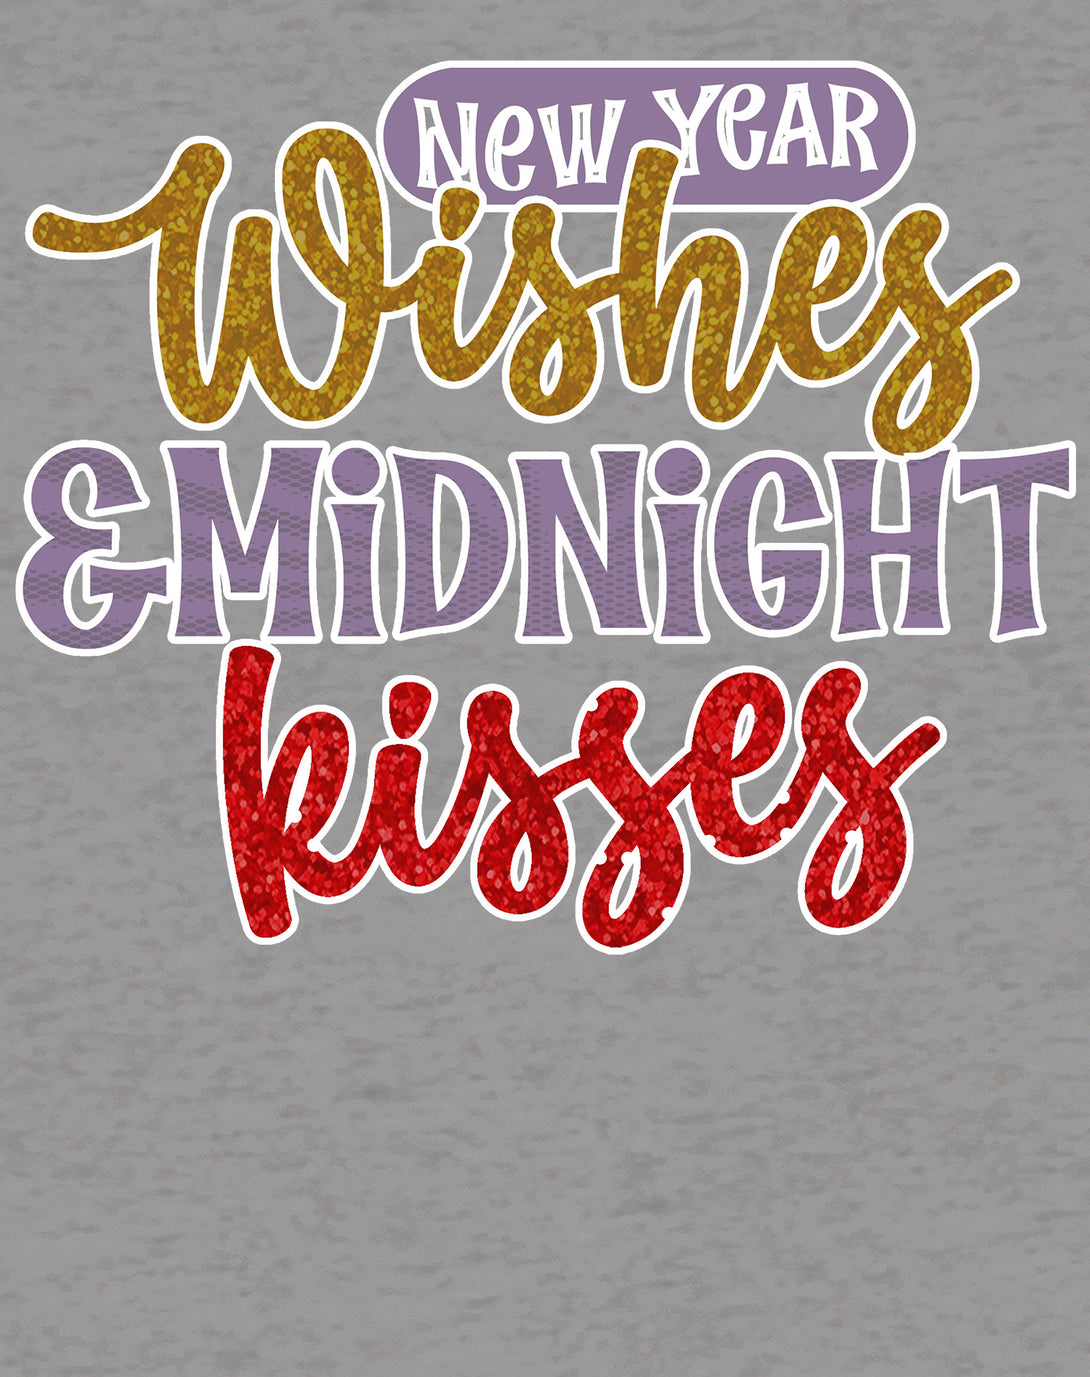 NYE New Year Wishes Midnight Kisses Eve Party Cute Couples Unisex Sweatshirt Sports Grey - Urban Species Design Close Up